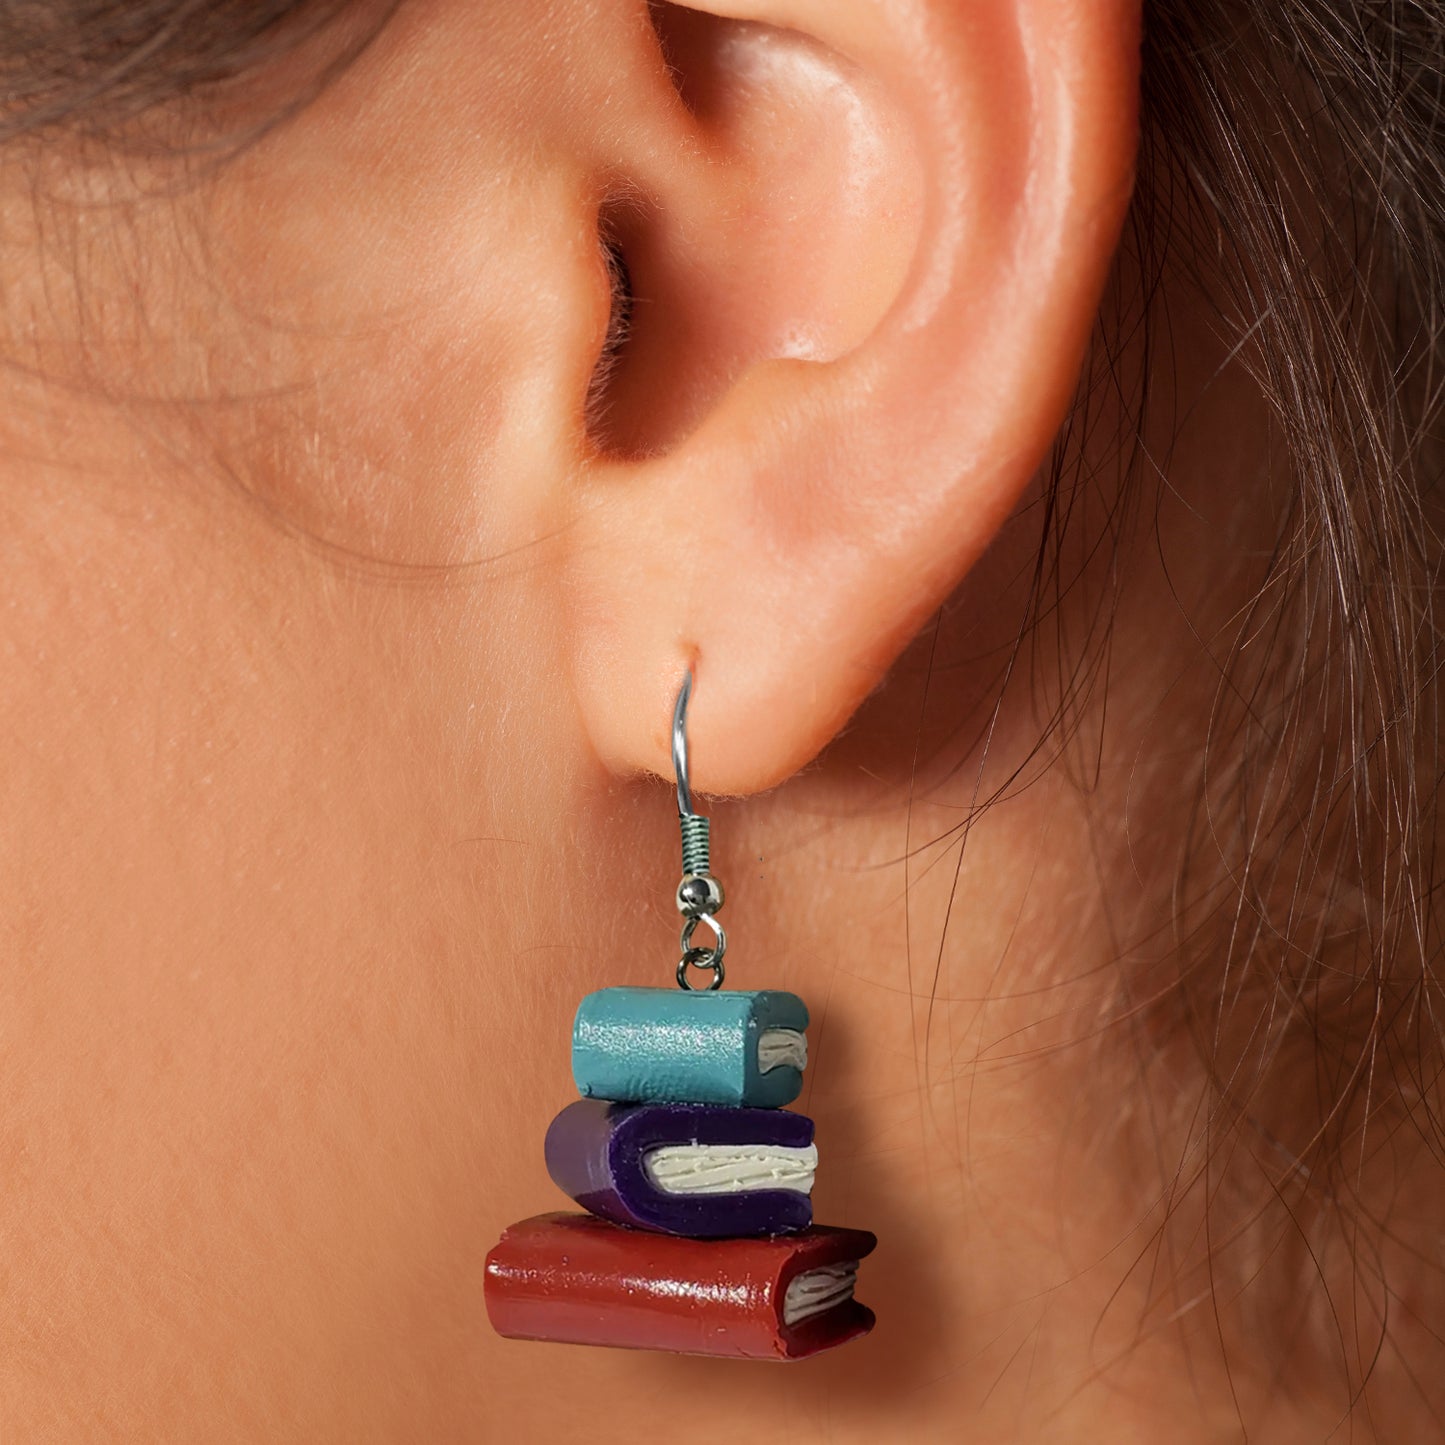 A close-up of a woman's ear. She is wearing a pair of small, clay earrings in the shape a stack of books. The earrings are on a set of silver earring hooks